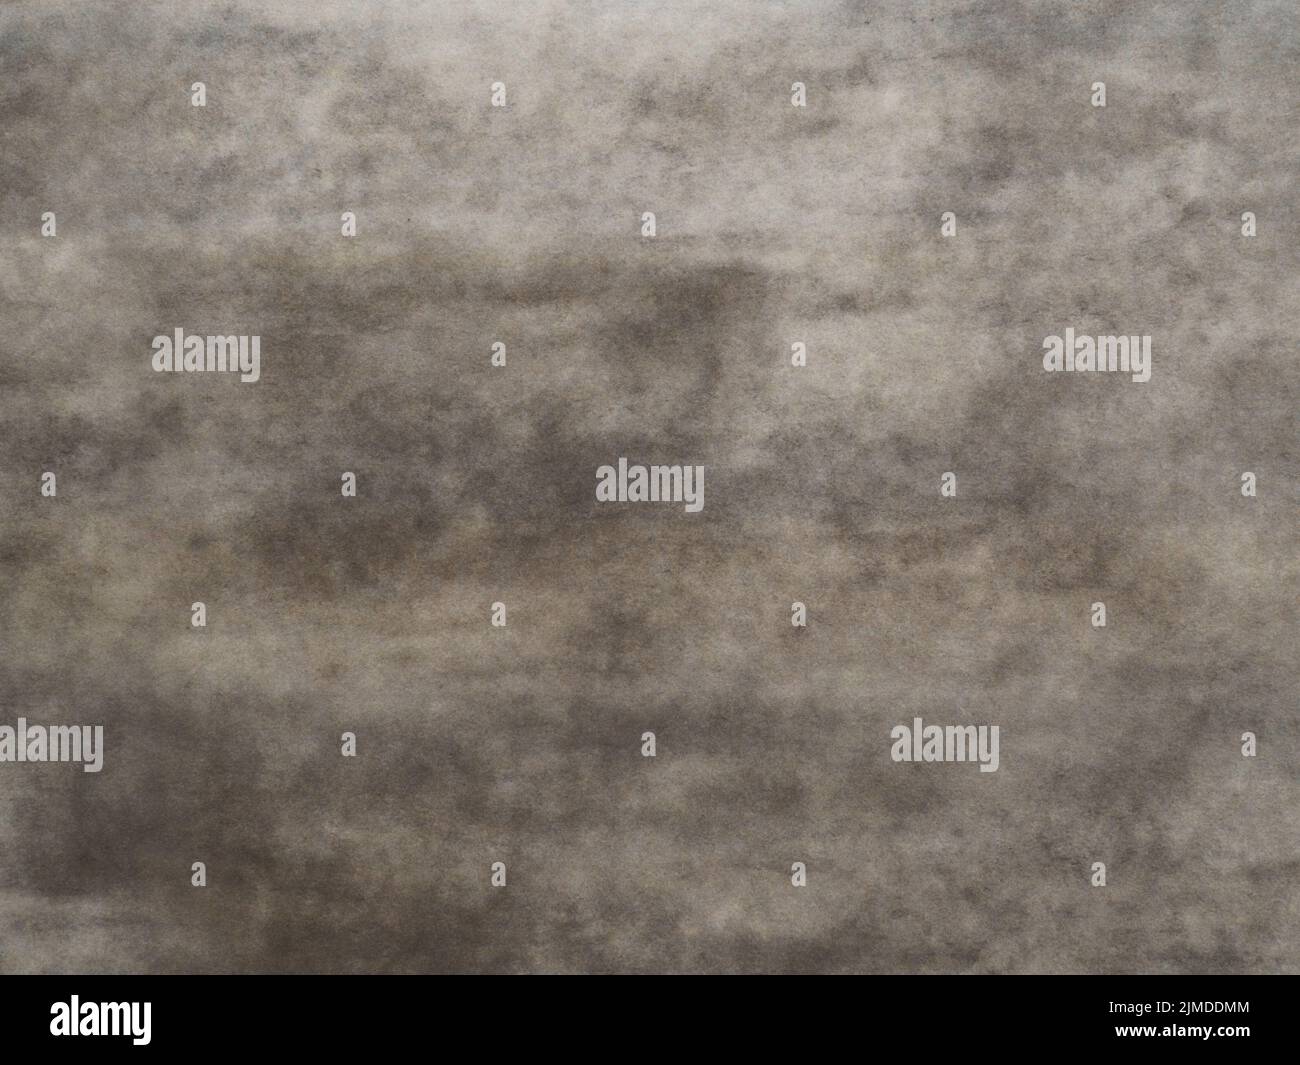 Abstract Decorative Grey Background. Wide Angle Rough Stylized Texture Wallpaper With Copy Space for Design Stock Photo